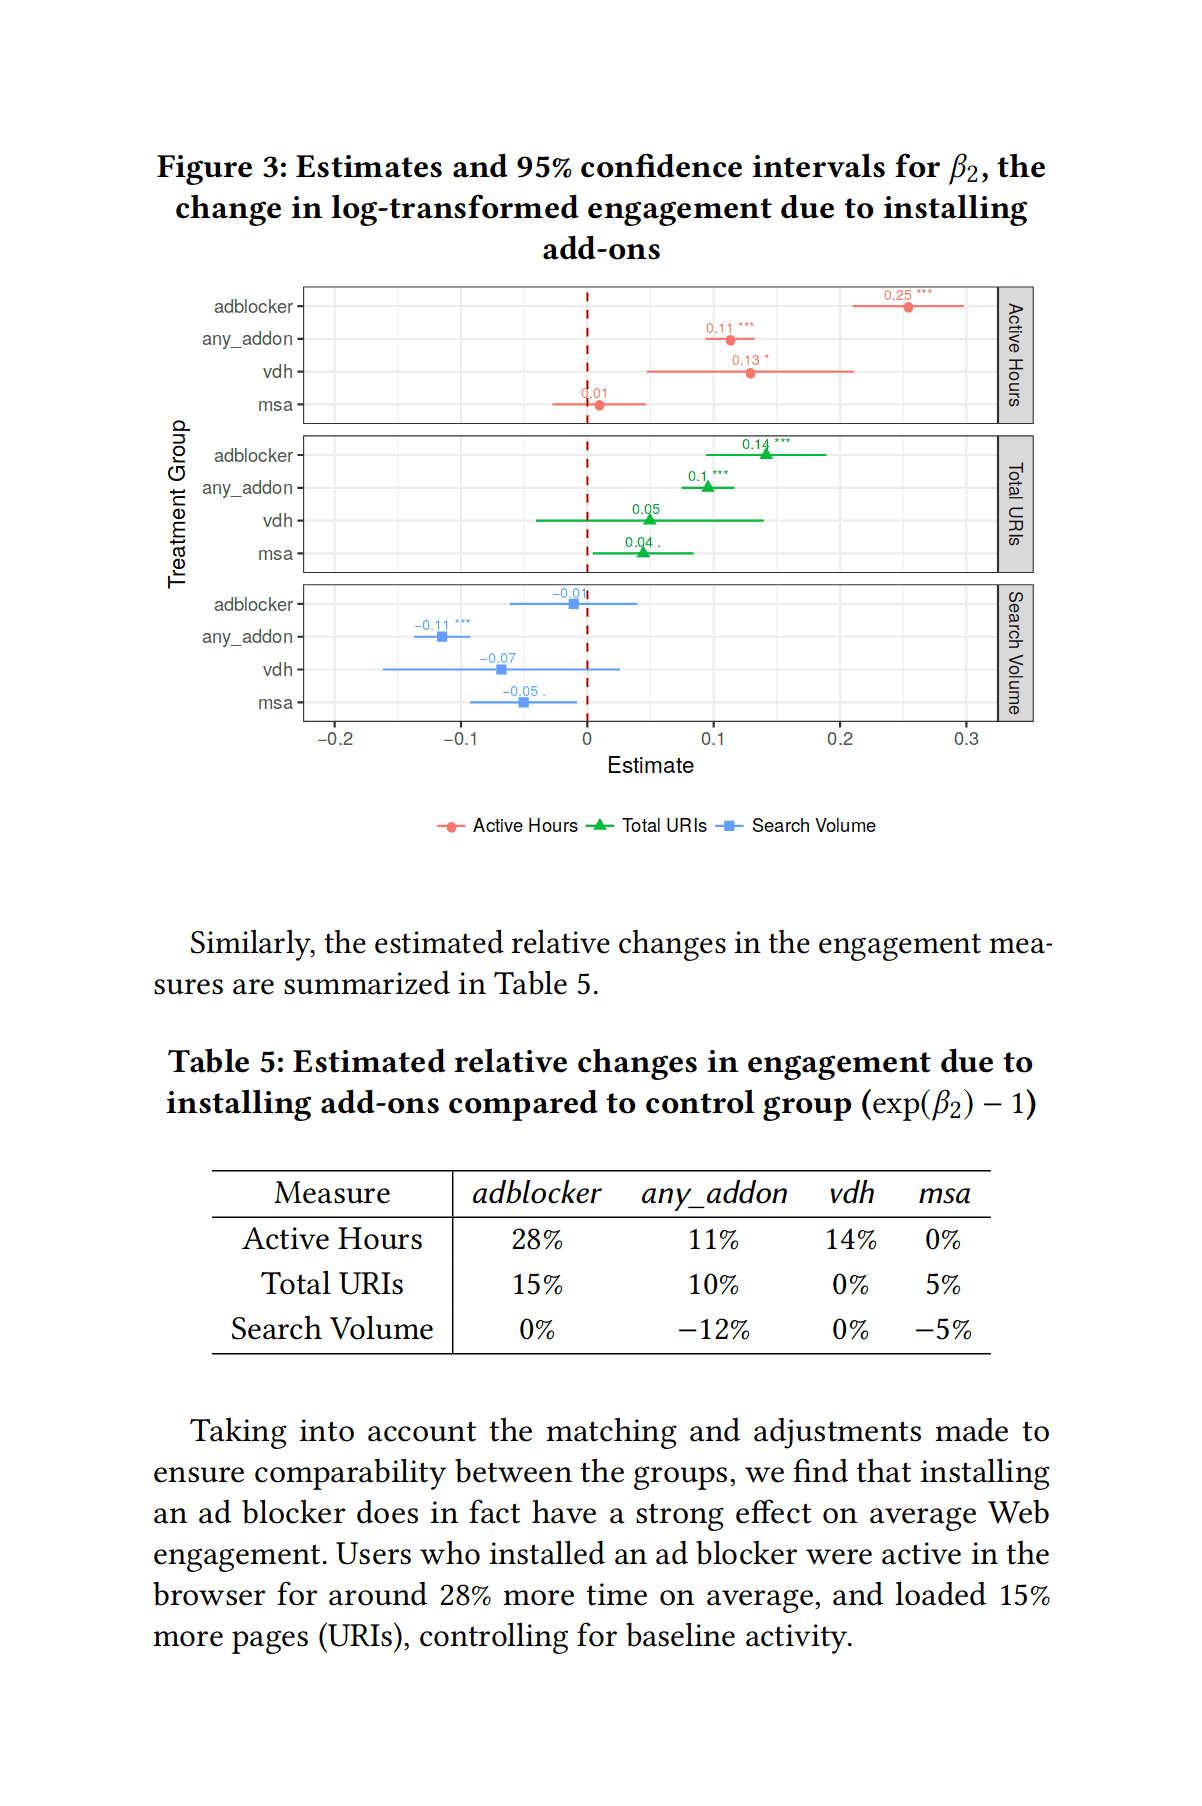 Miroglio et al 2018, benefits to Firefox users from adblockers: “Figure 3: Estimates & 95% CI for B2, the change in log-transformed engagement due to installing add-ons [adblockers]”; “Table 5: Estimated relative changes in engagement due to installing add-ons compared to control group (exp(B2) − 1)”